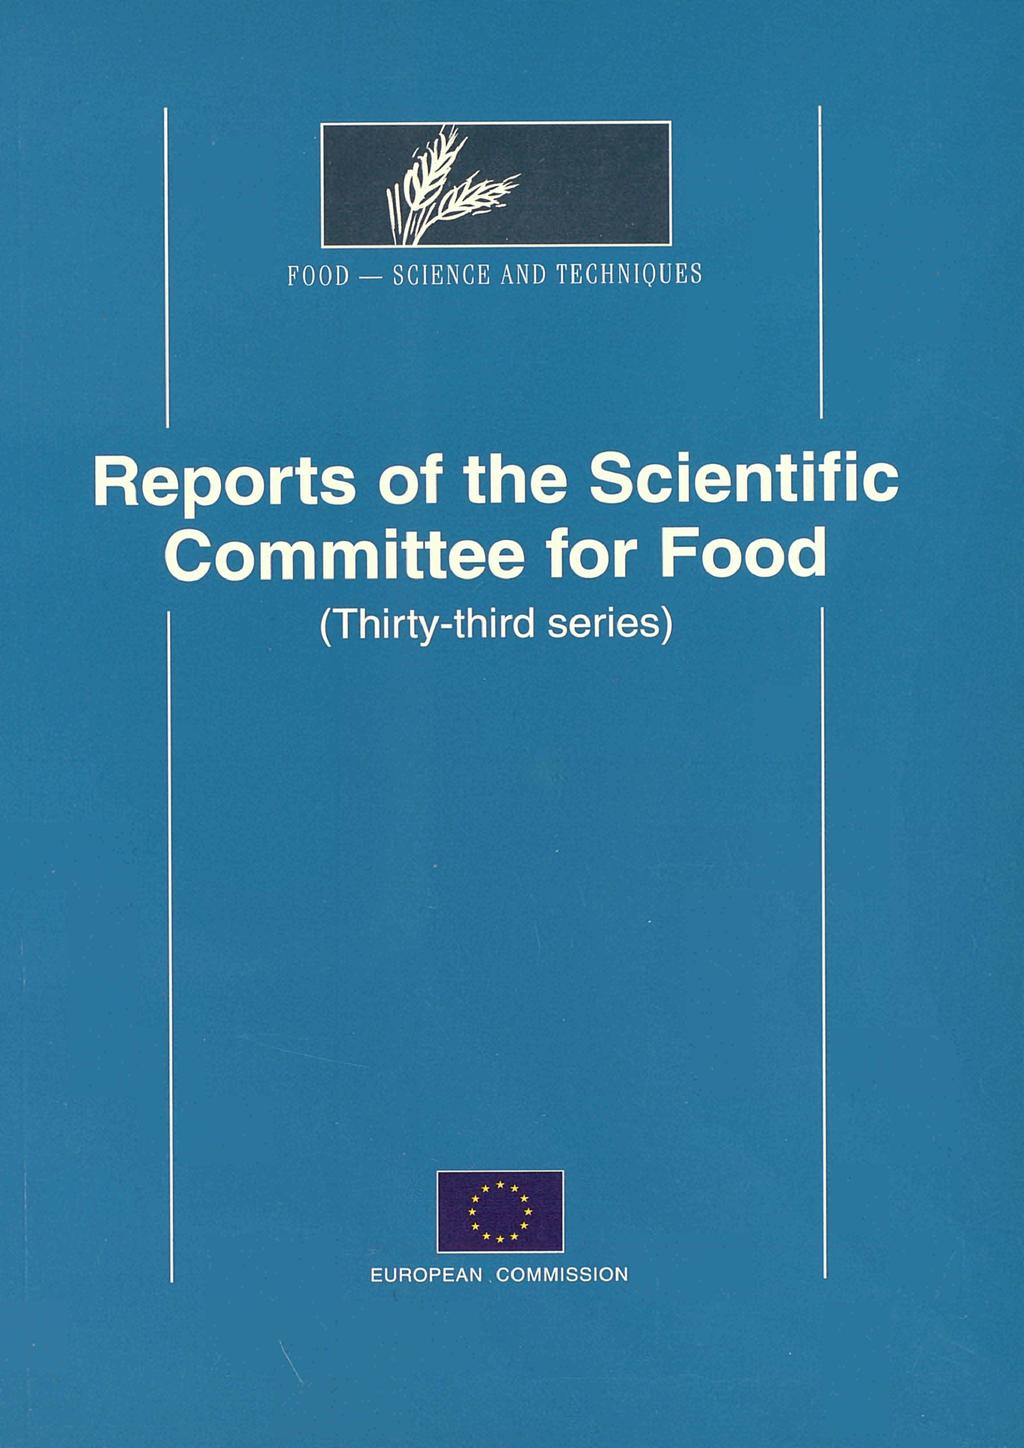 FOOD - SCIENCE AND TECHNIQUES Reports of the Scientific